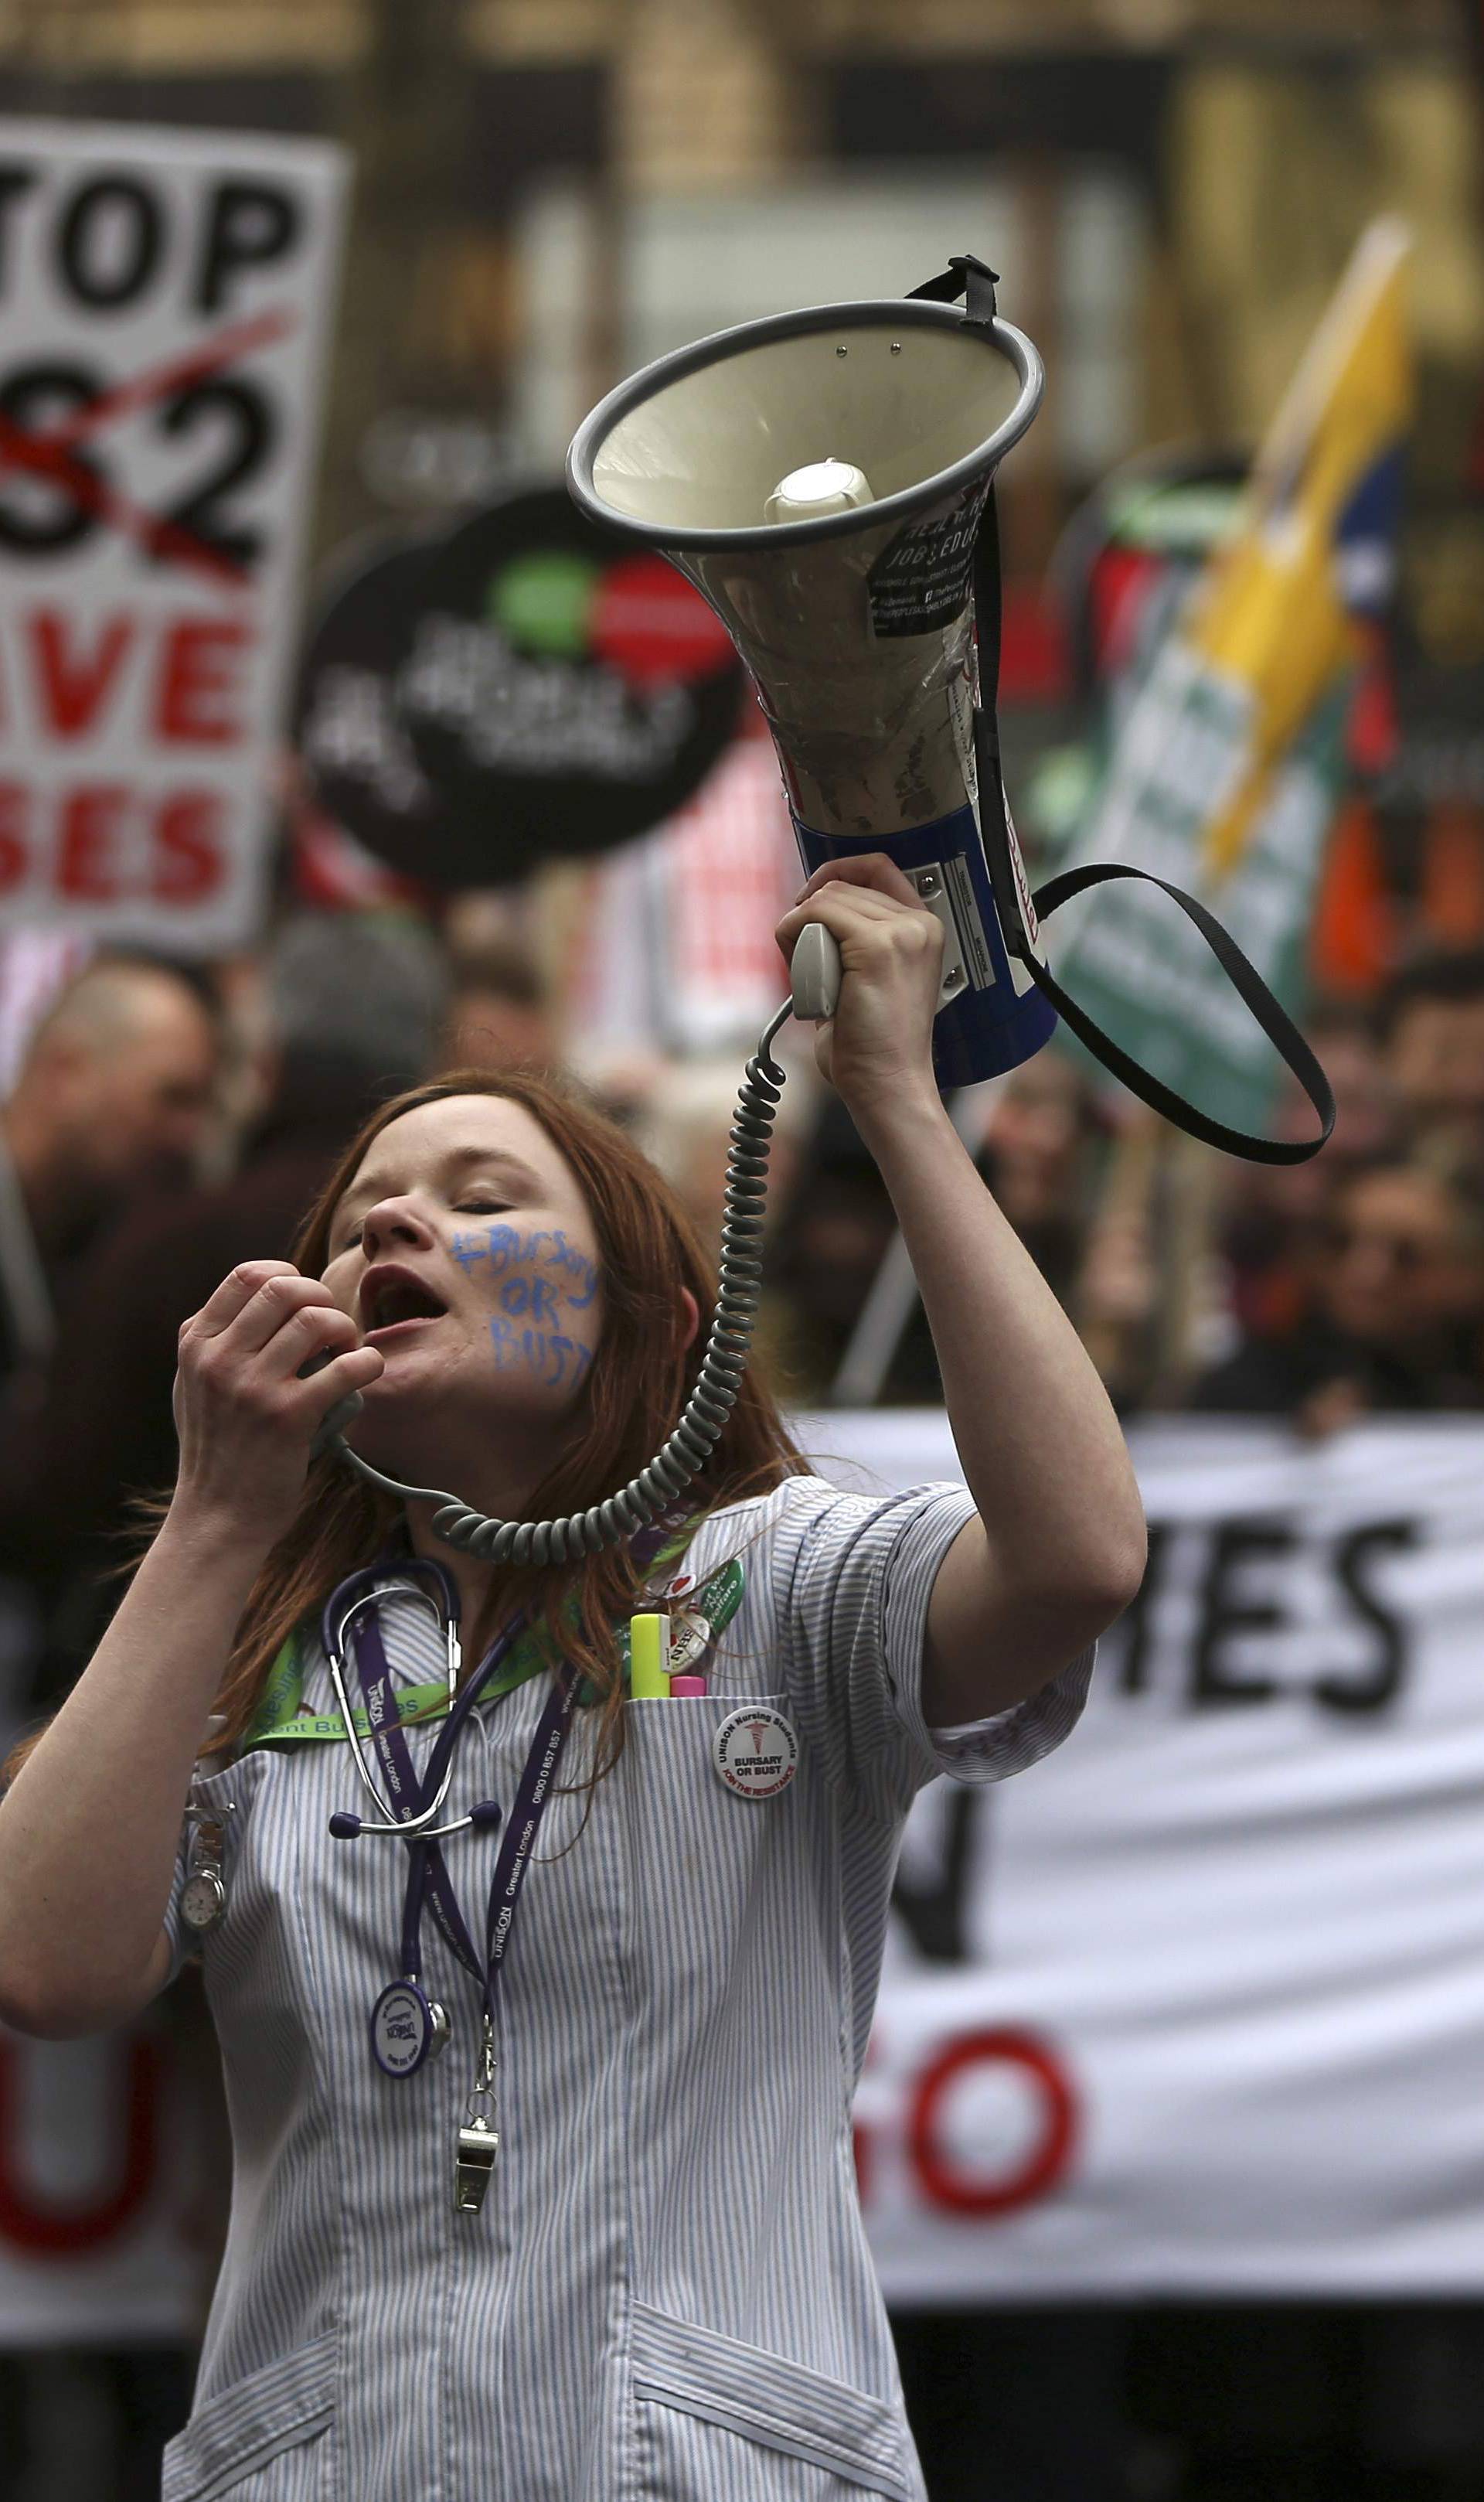 A demonstrator shouts through a megaphone during an anti-austerity protest in London